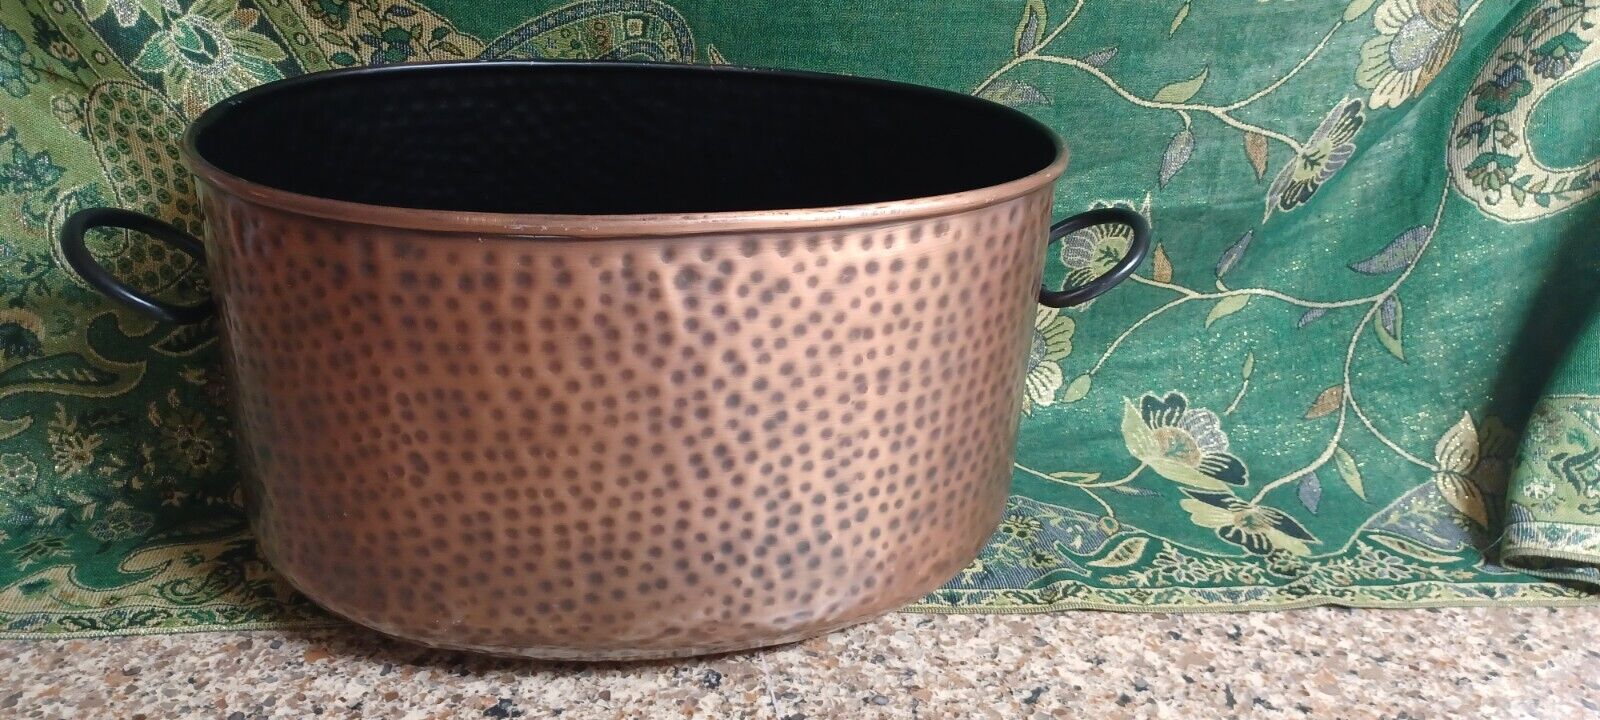 COPPER COLORED METAL BEVERAGE TUB MADE IN INDIA